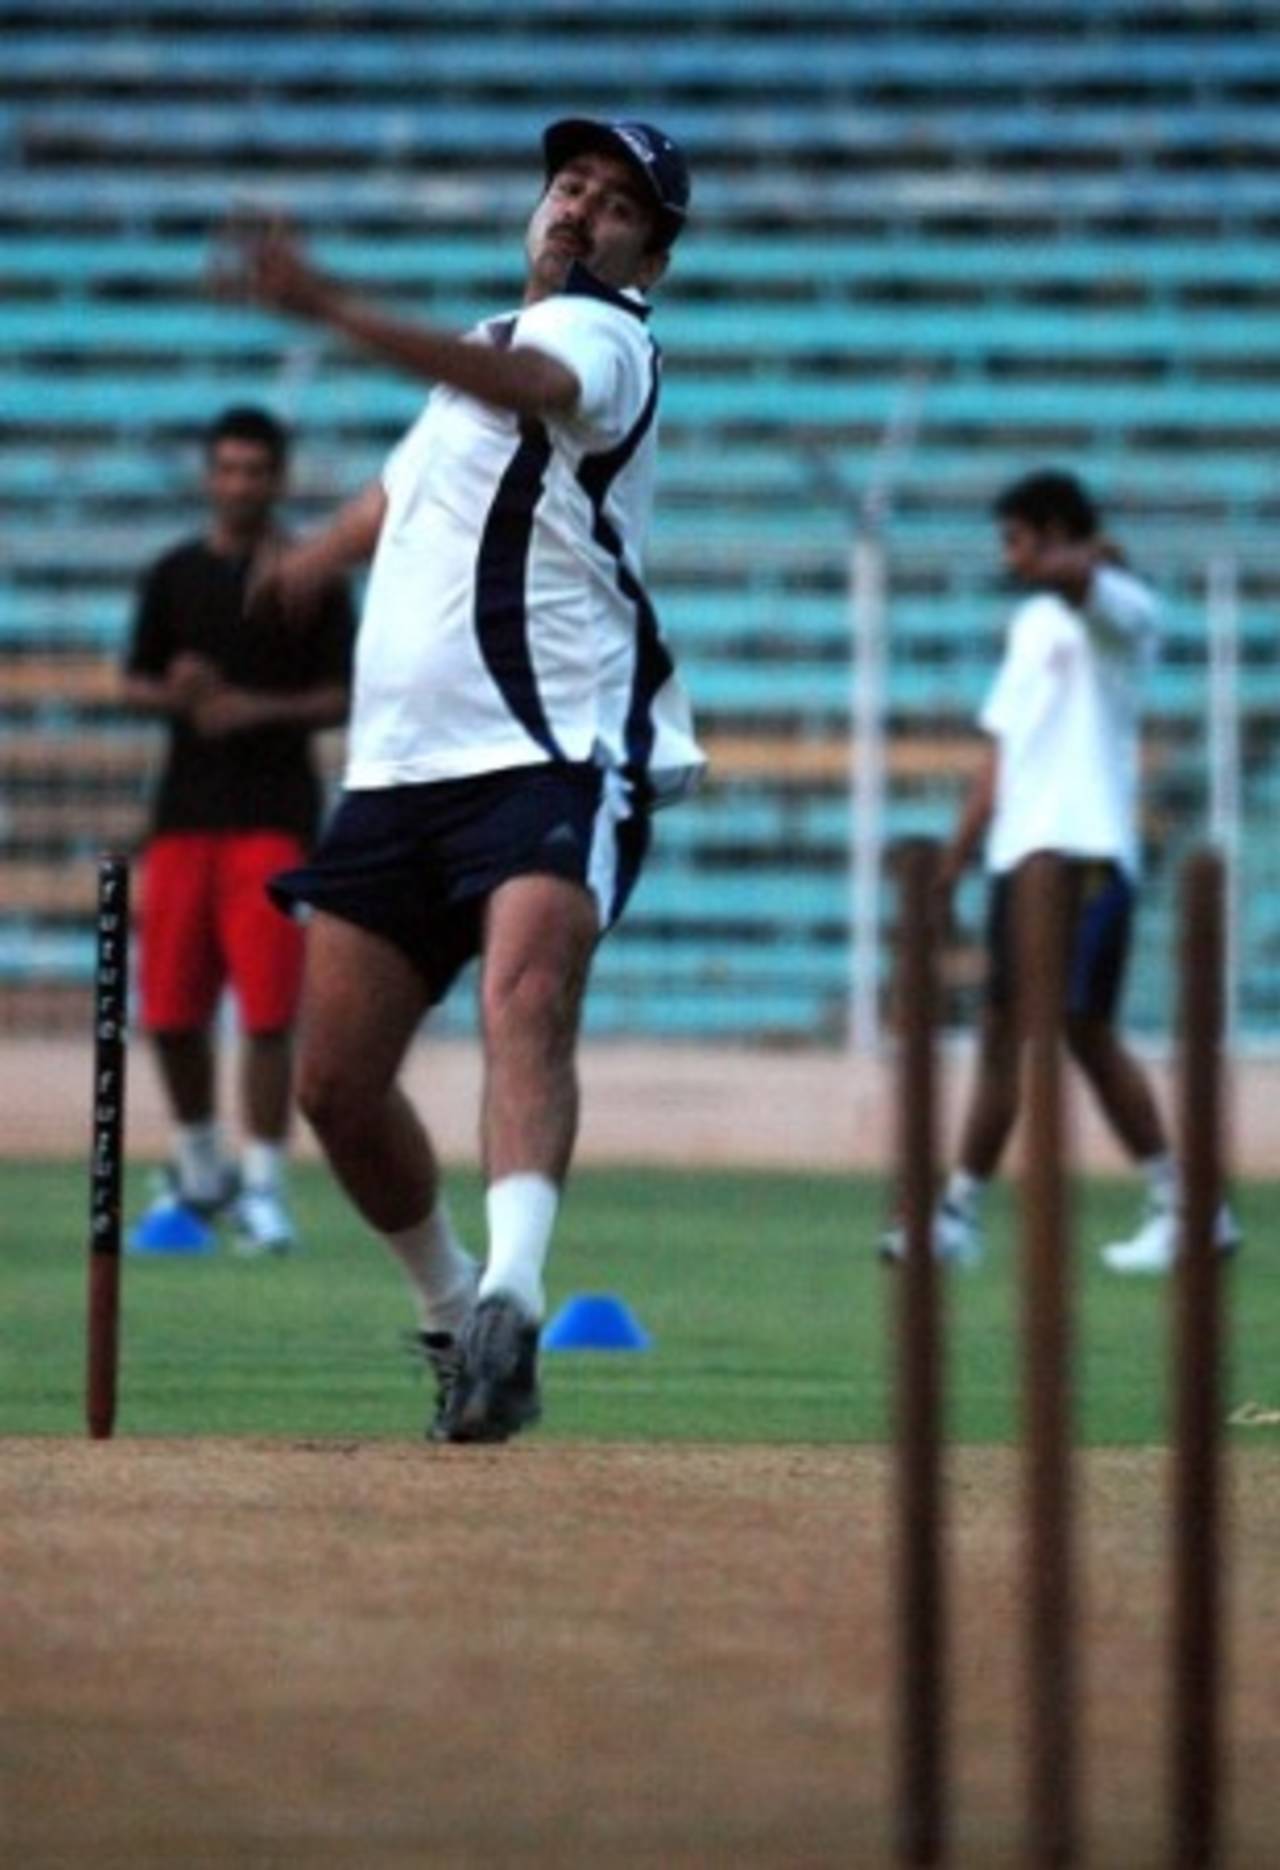 Manoj Prabhakar, Delhi's bowling coach, tries his luck with the cherry during practice at the Wankhede Stadium, Mumbai, November 21, 2007